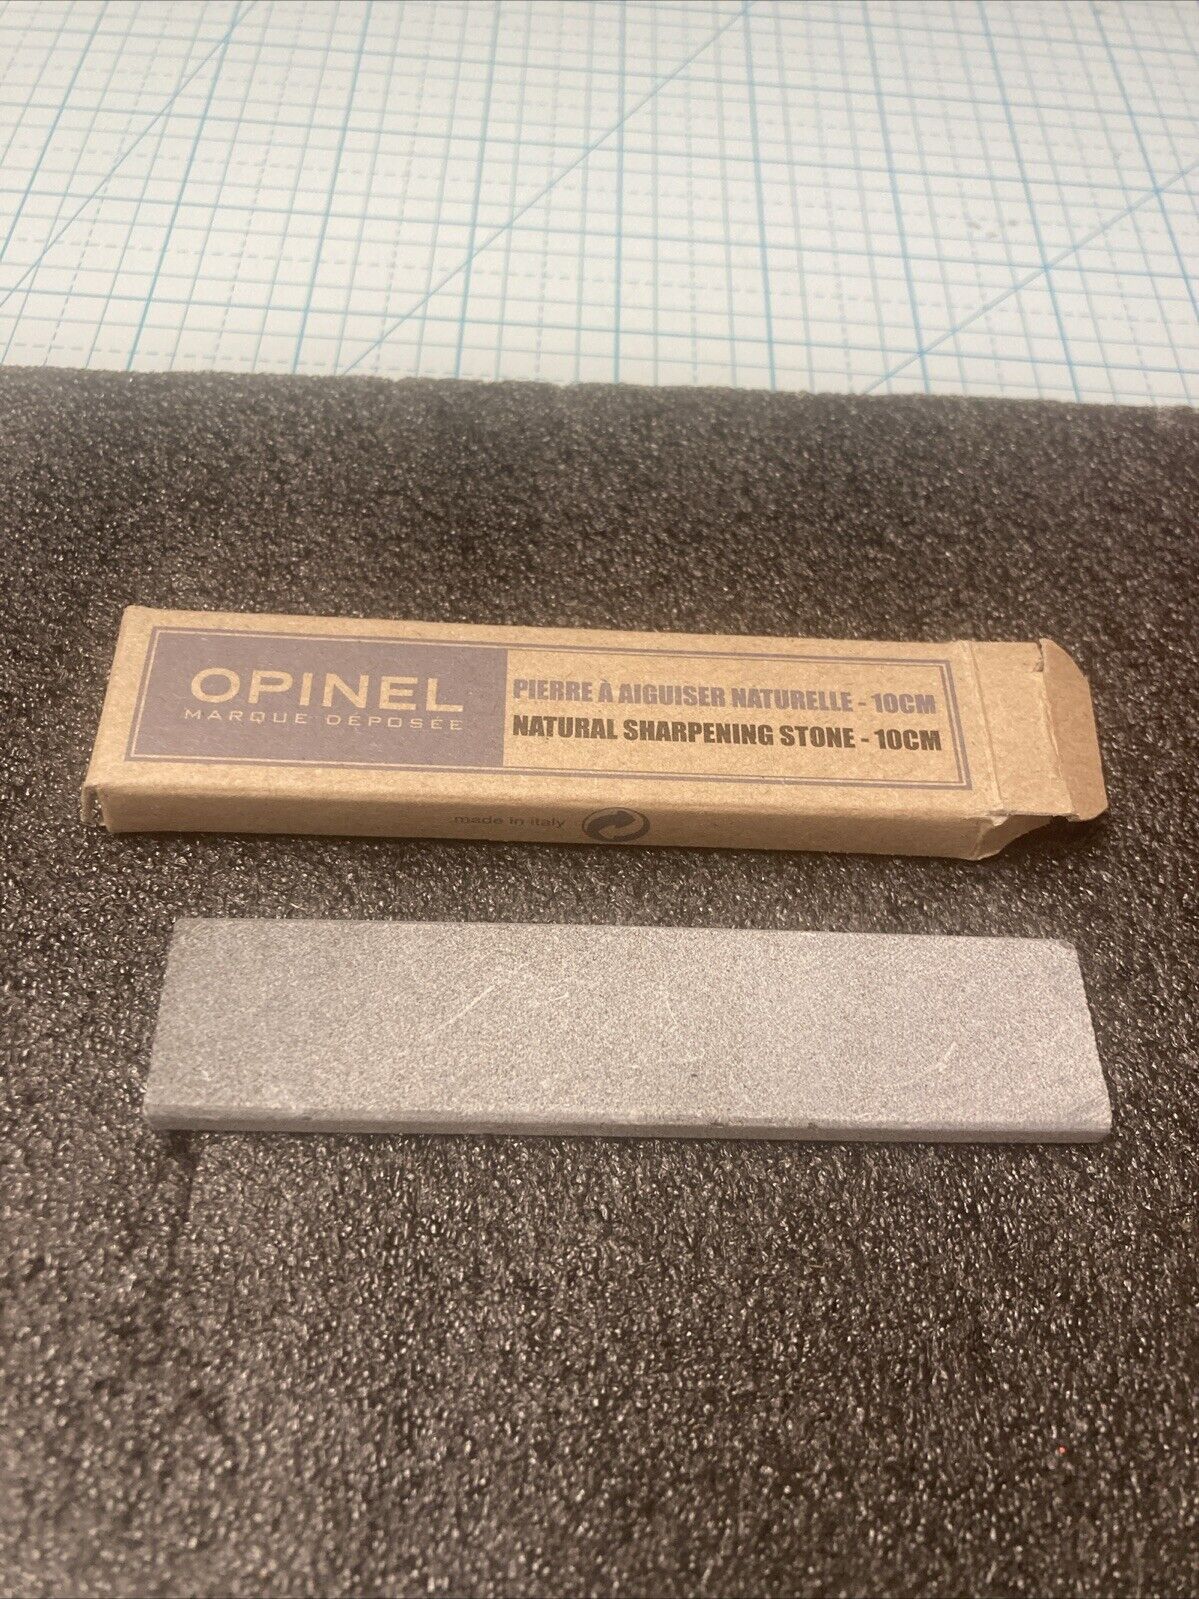 NEW/NEW IN BOX Opinel France 10cm Natural Sharpening Stone- 10CM. RARE Italy.